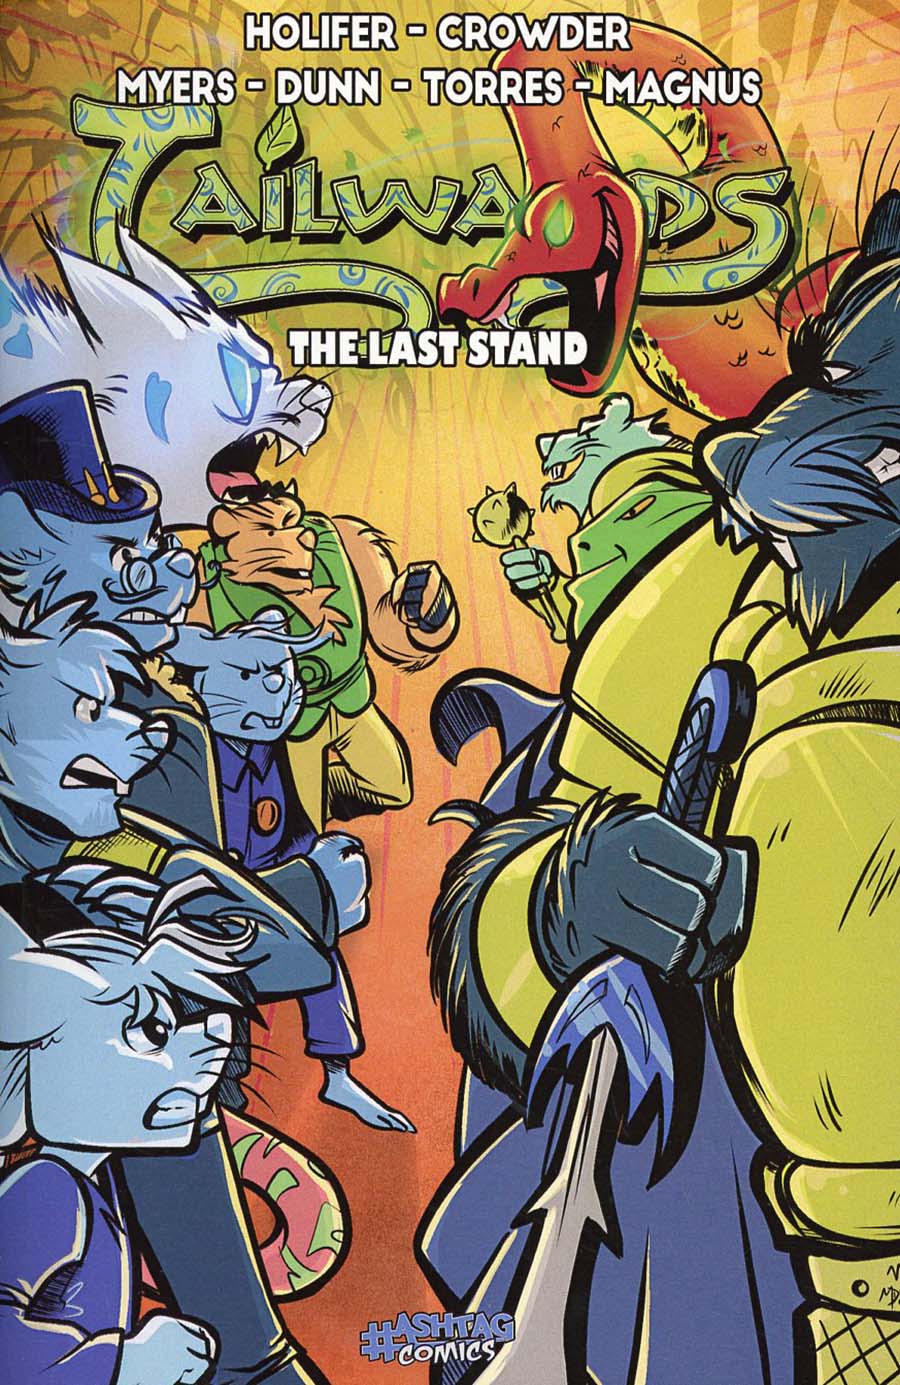 Tailwands Vol 6 The Last Stand GN